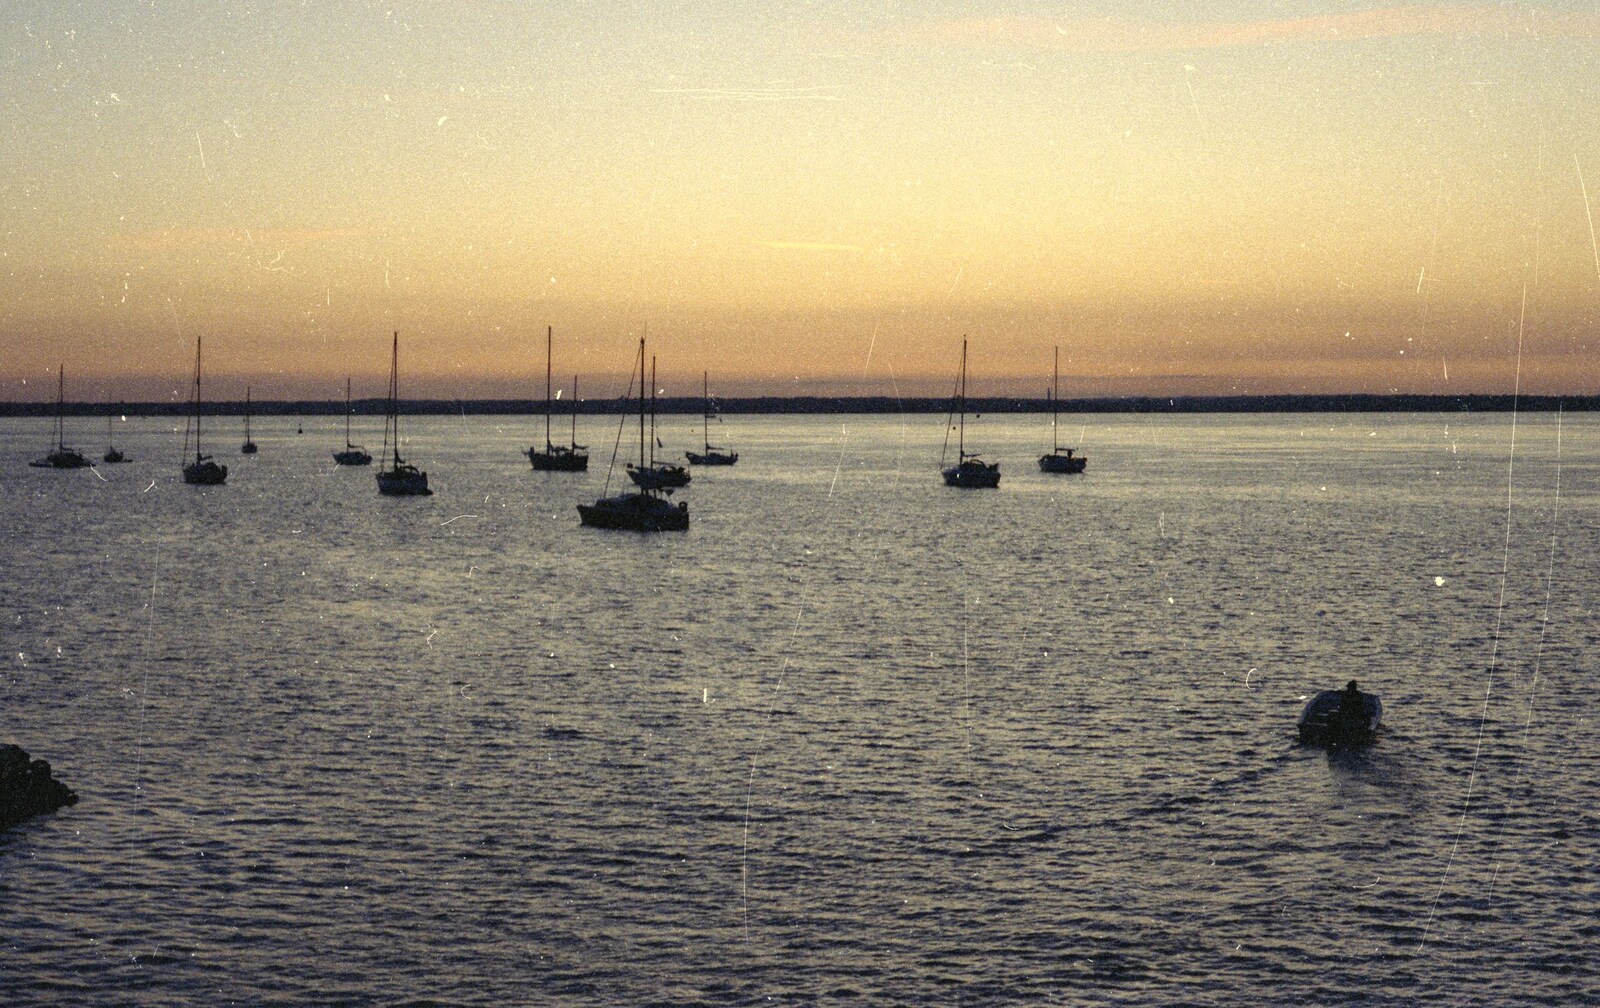 Sunset on the Solent, from the Lymington-Yarmouth Ferry from Brockenhurst College Exams and Miscellany, Barton on Sea, Hampshire - 10th June 1985